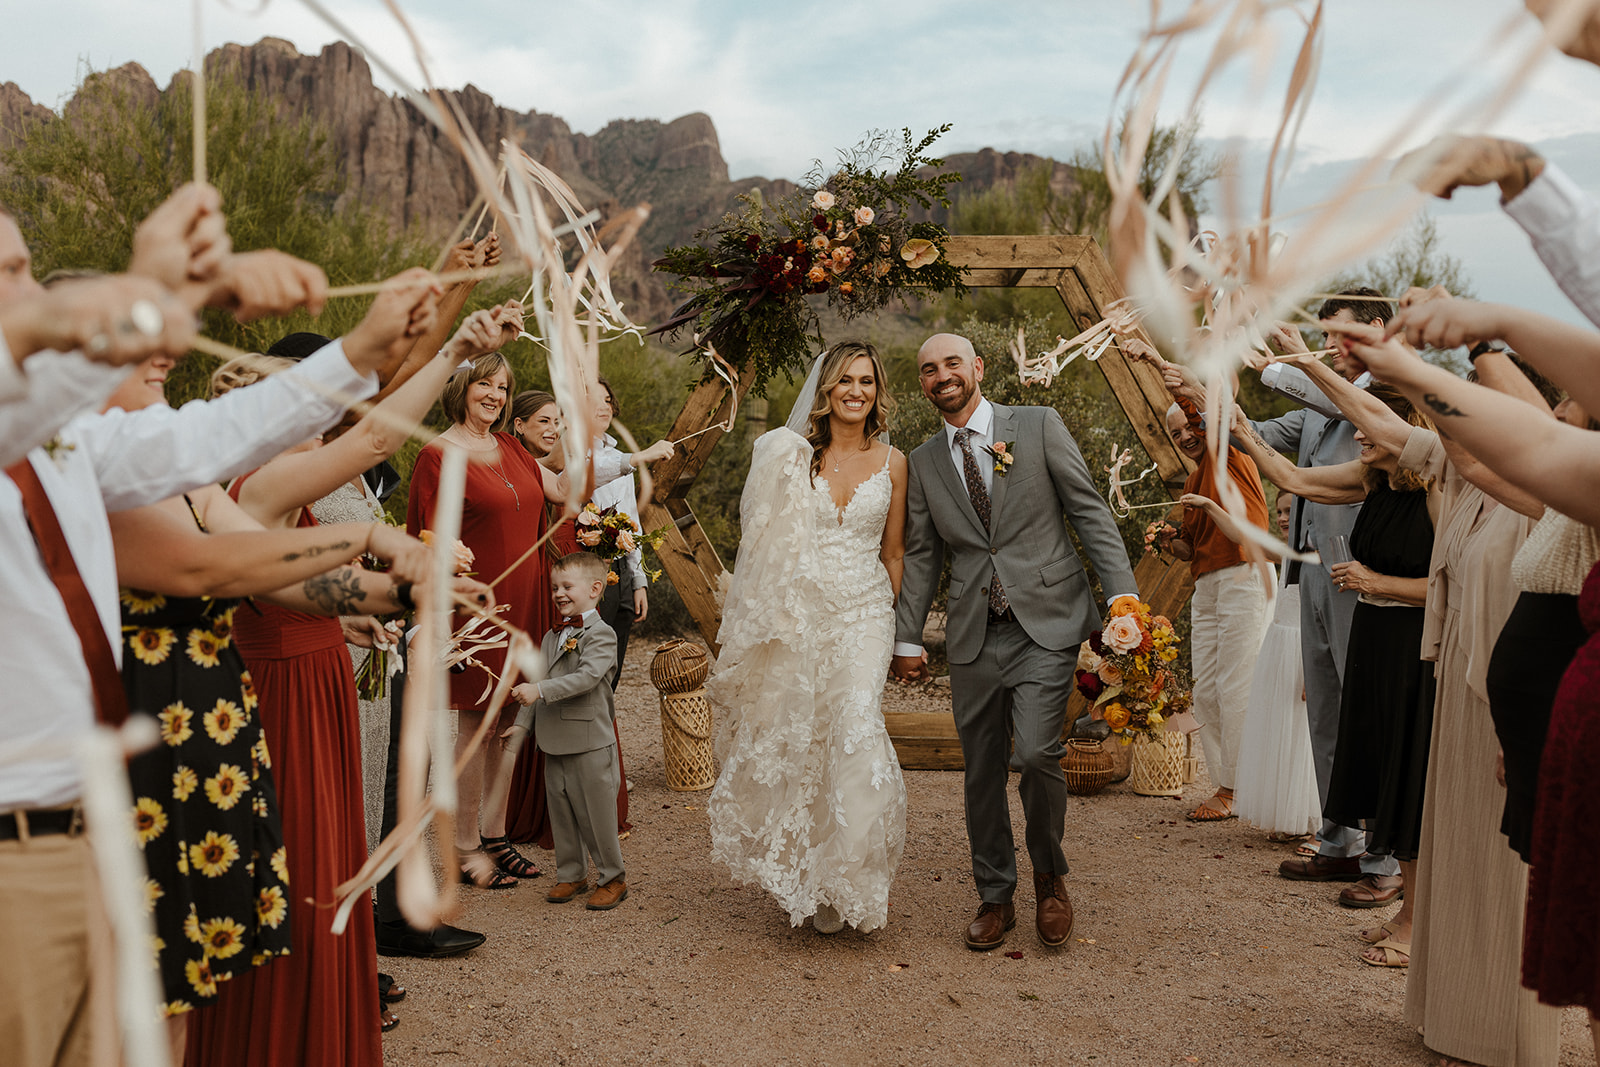 Bride and groom exit their stunning lost dutchman state park wedding ceremony